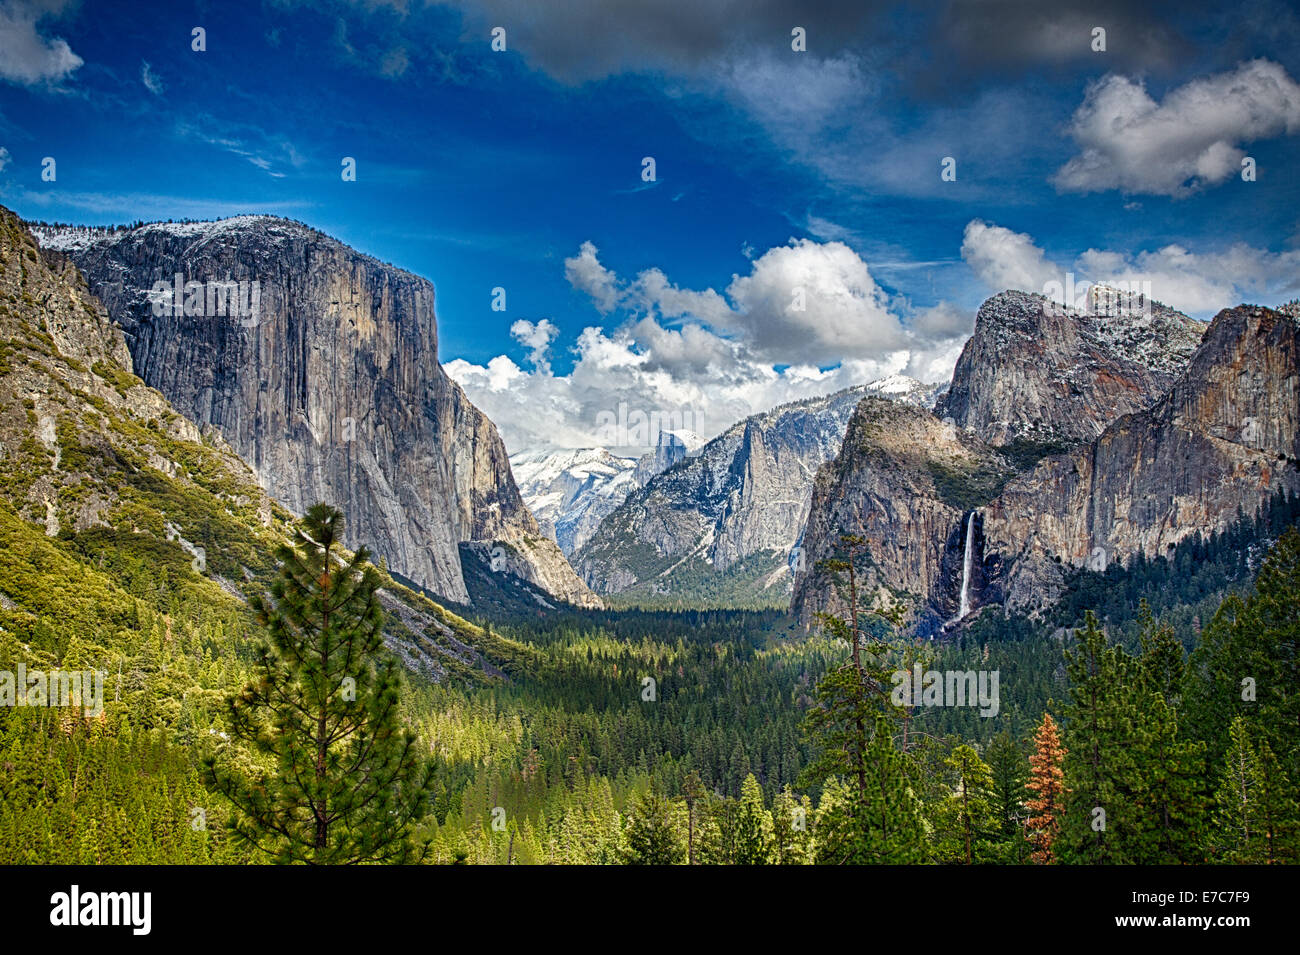 The view of the Yosemite Valley from the tunnel entrance to the Valley. Yosemite National Park, California Stock Photo